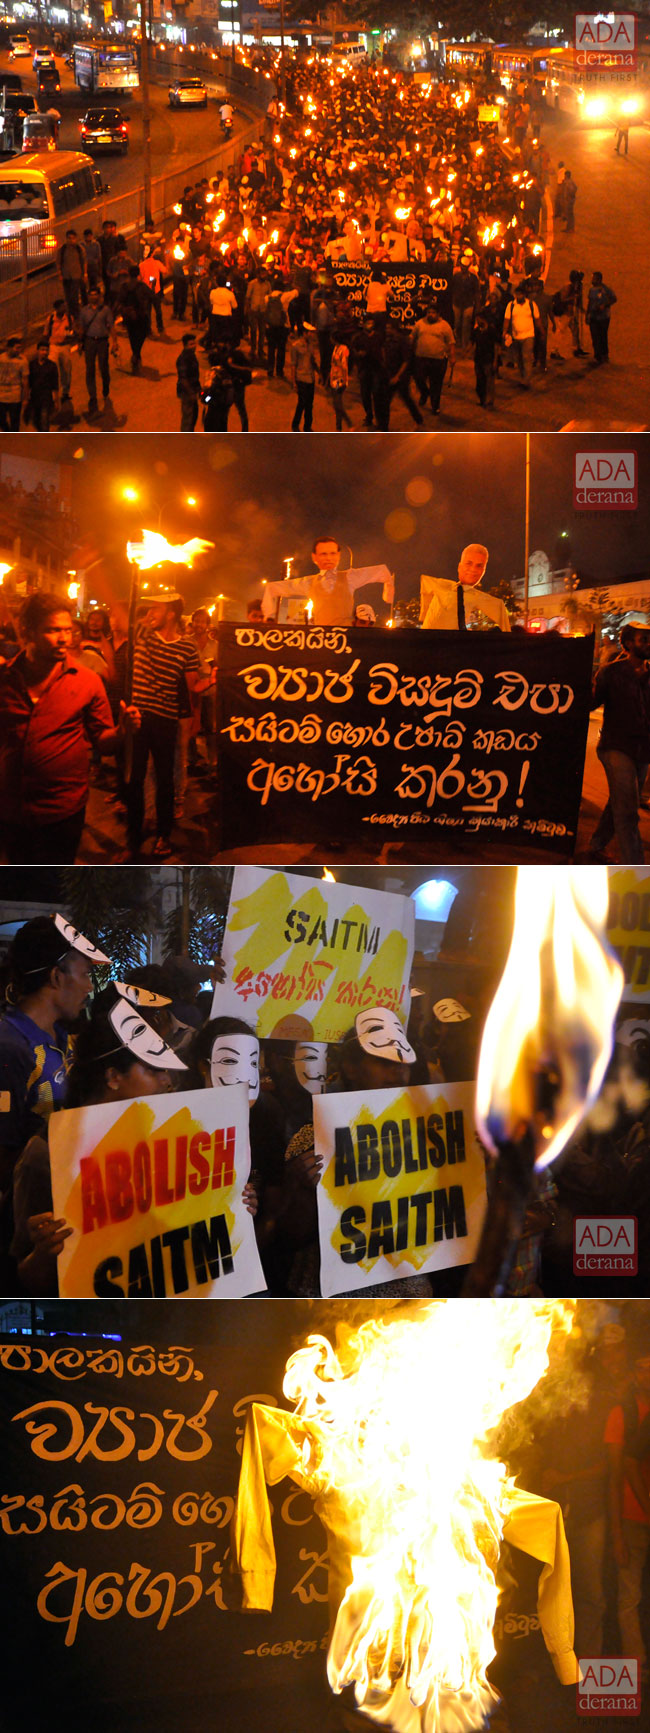 Night protest in Colombo...